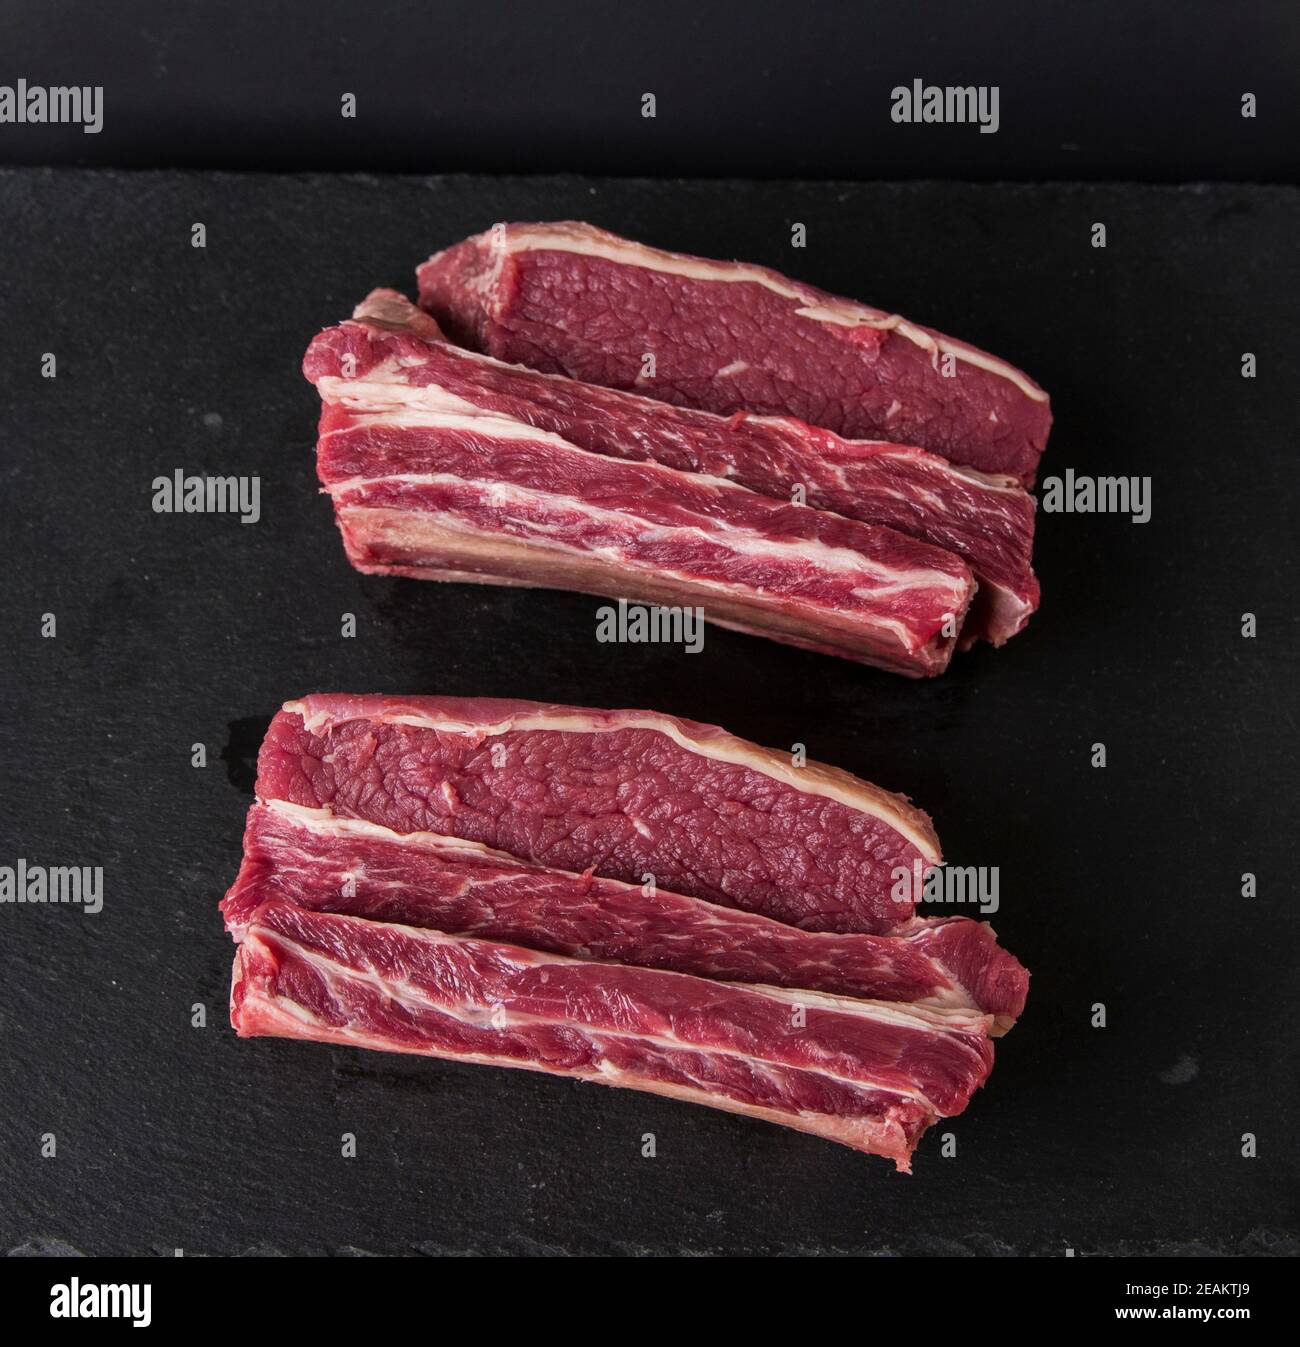 raw meat photographed on a wooden cutting board with a black background Stock Photo